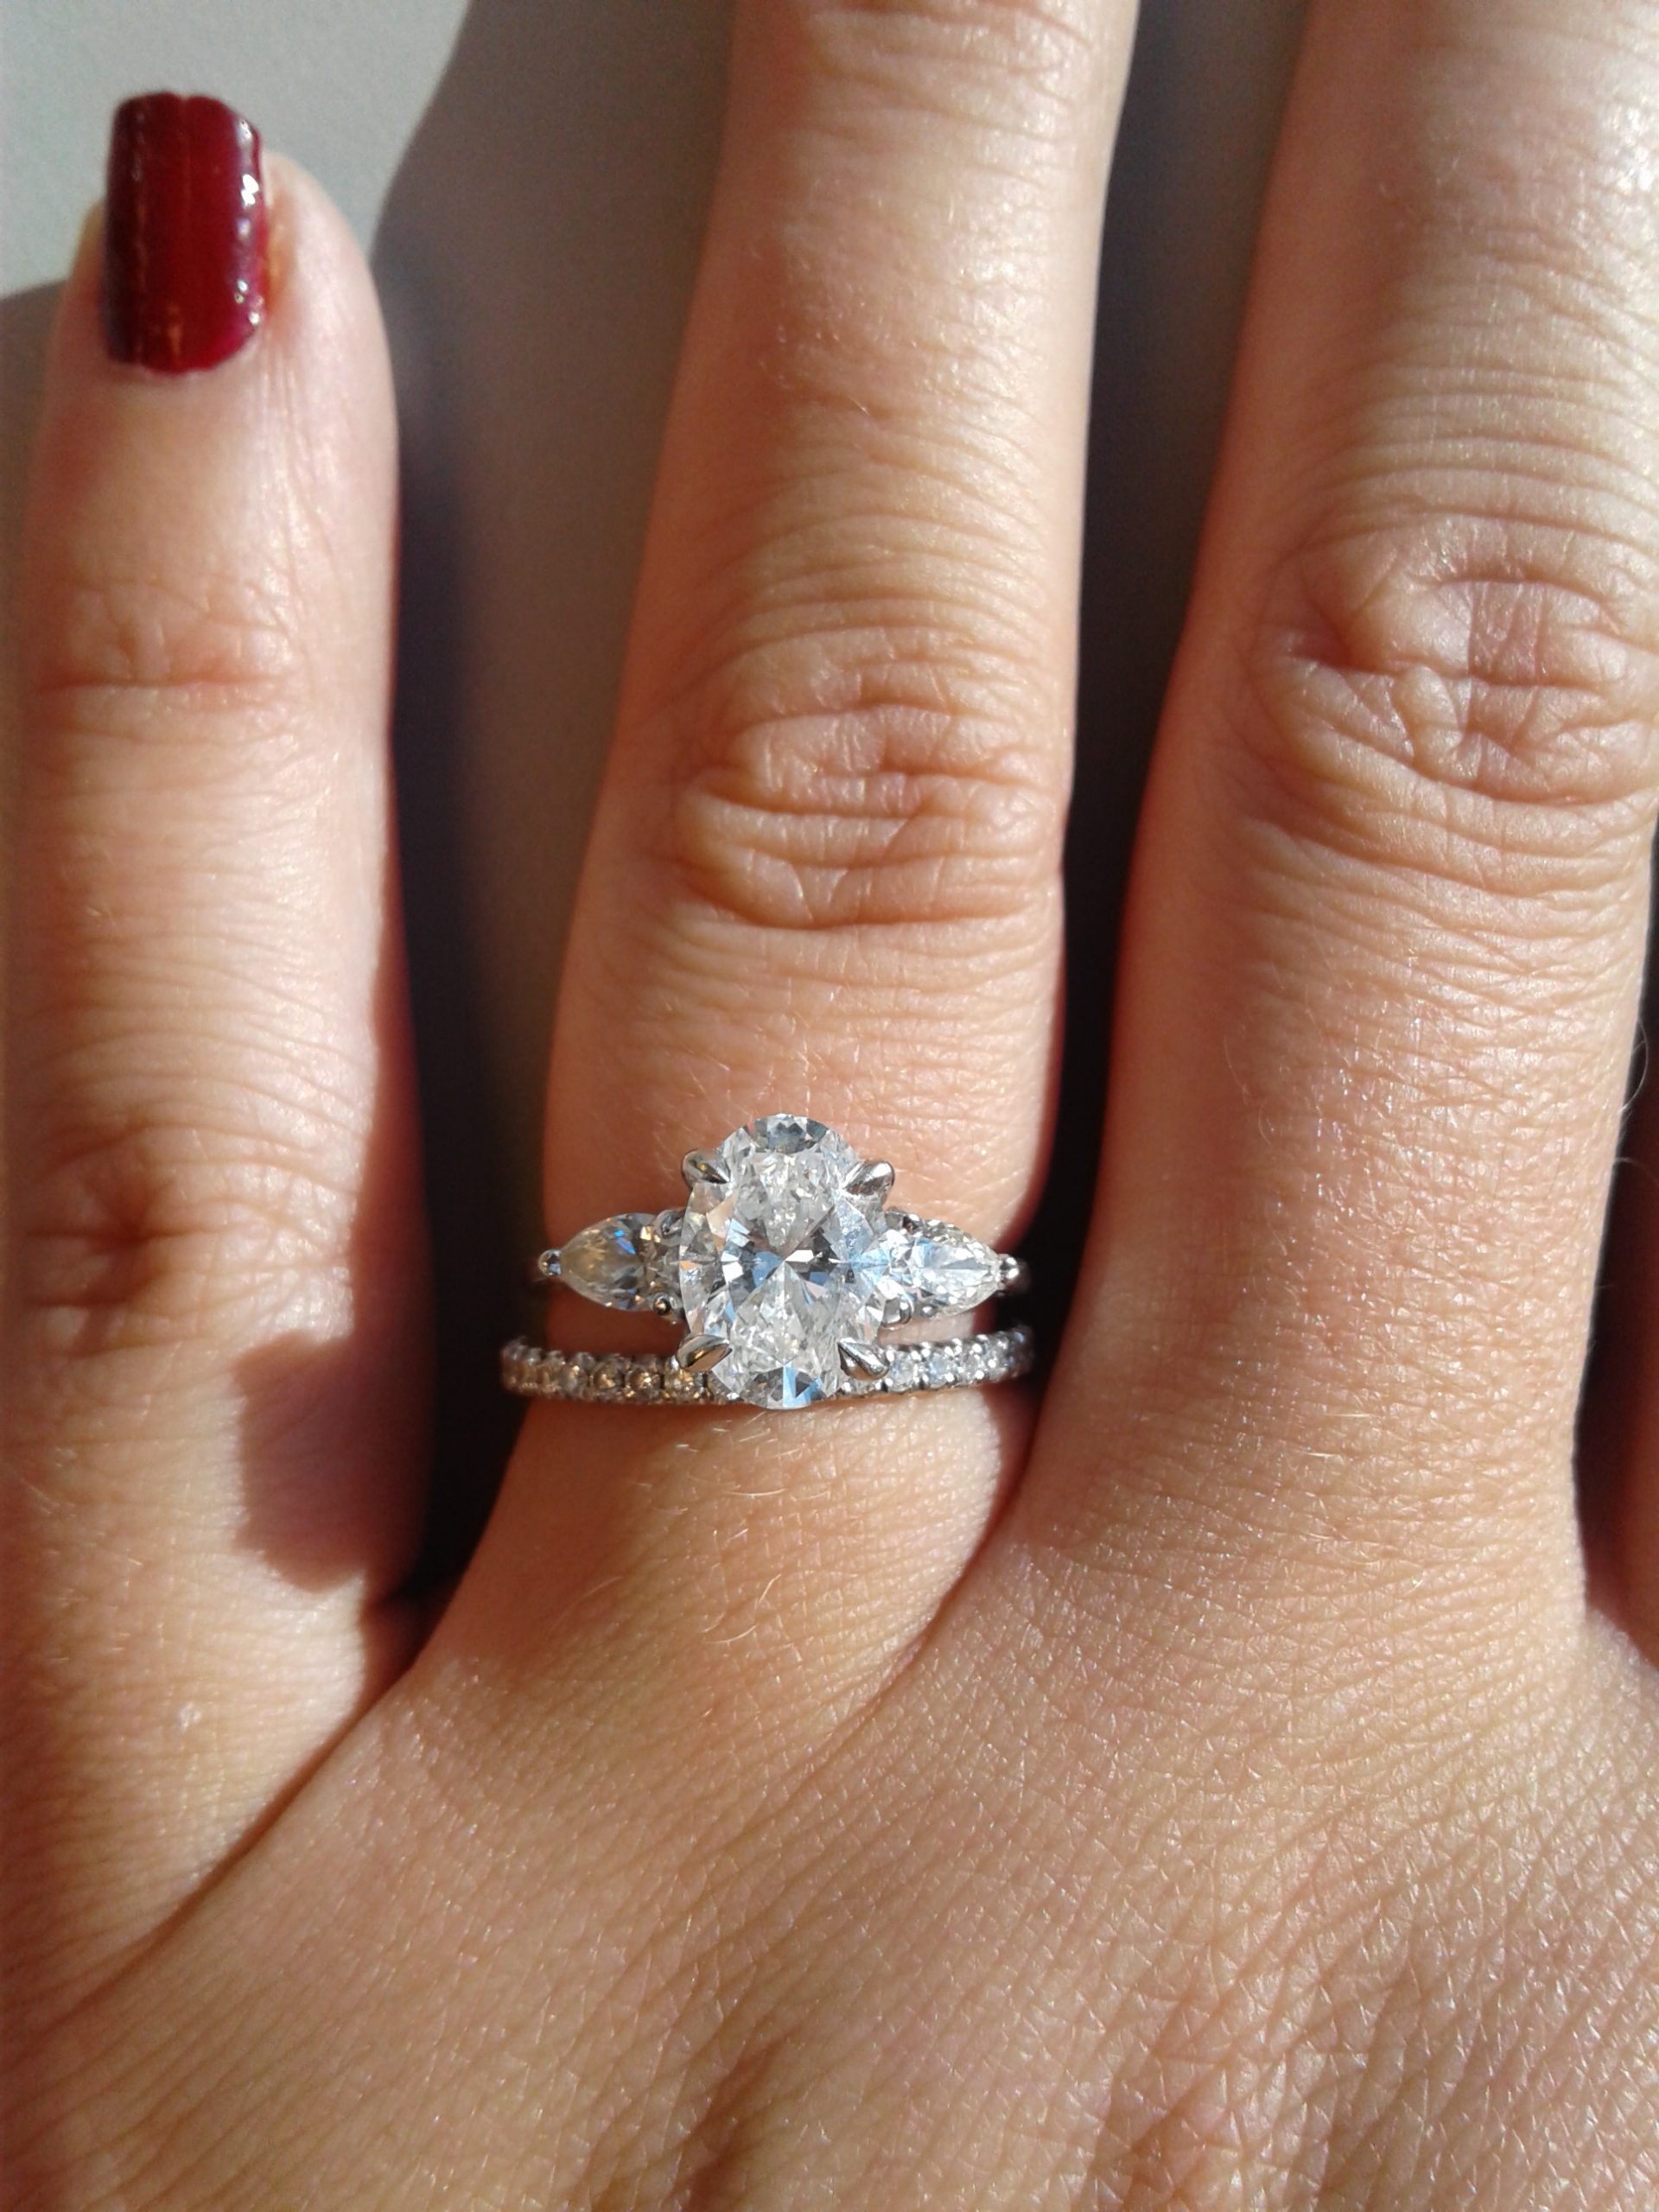 Show me your wedding band with an oval engagement ring